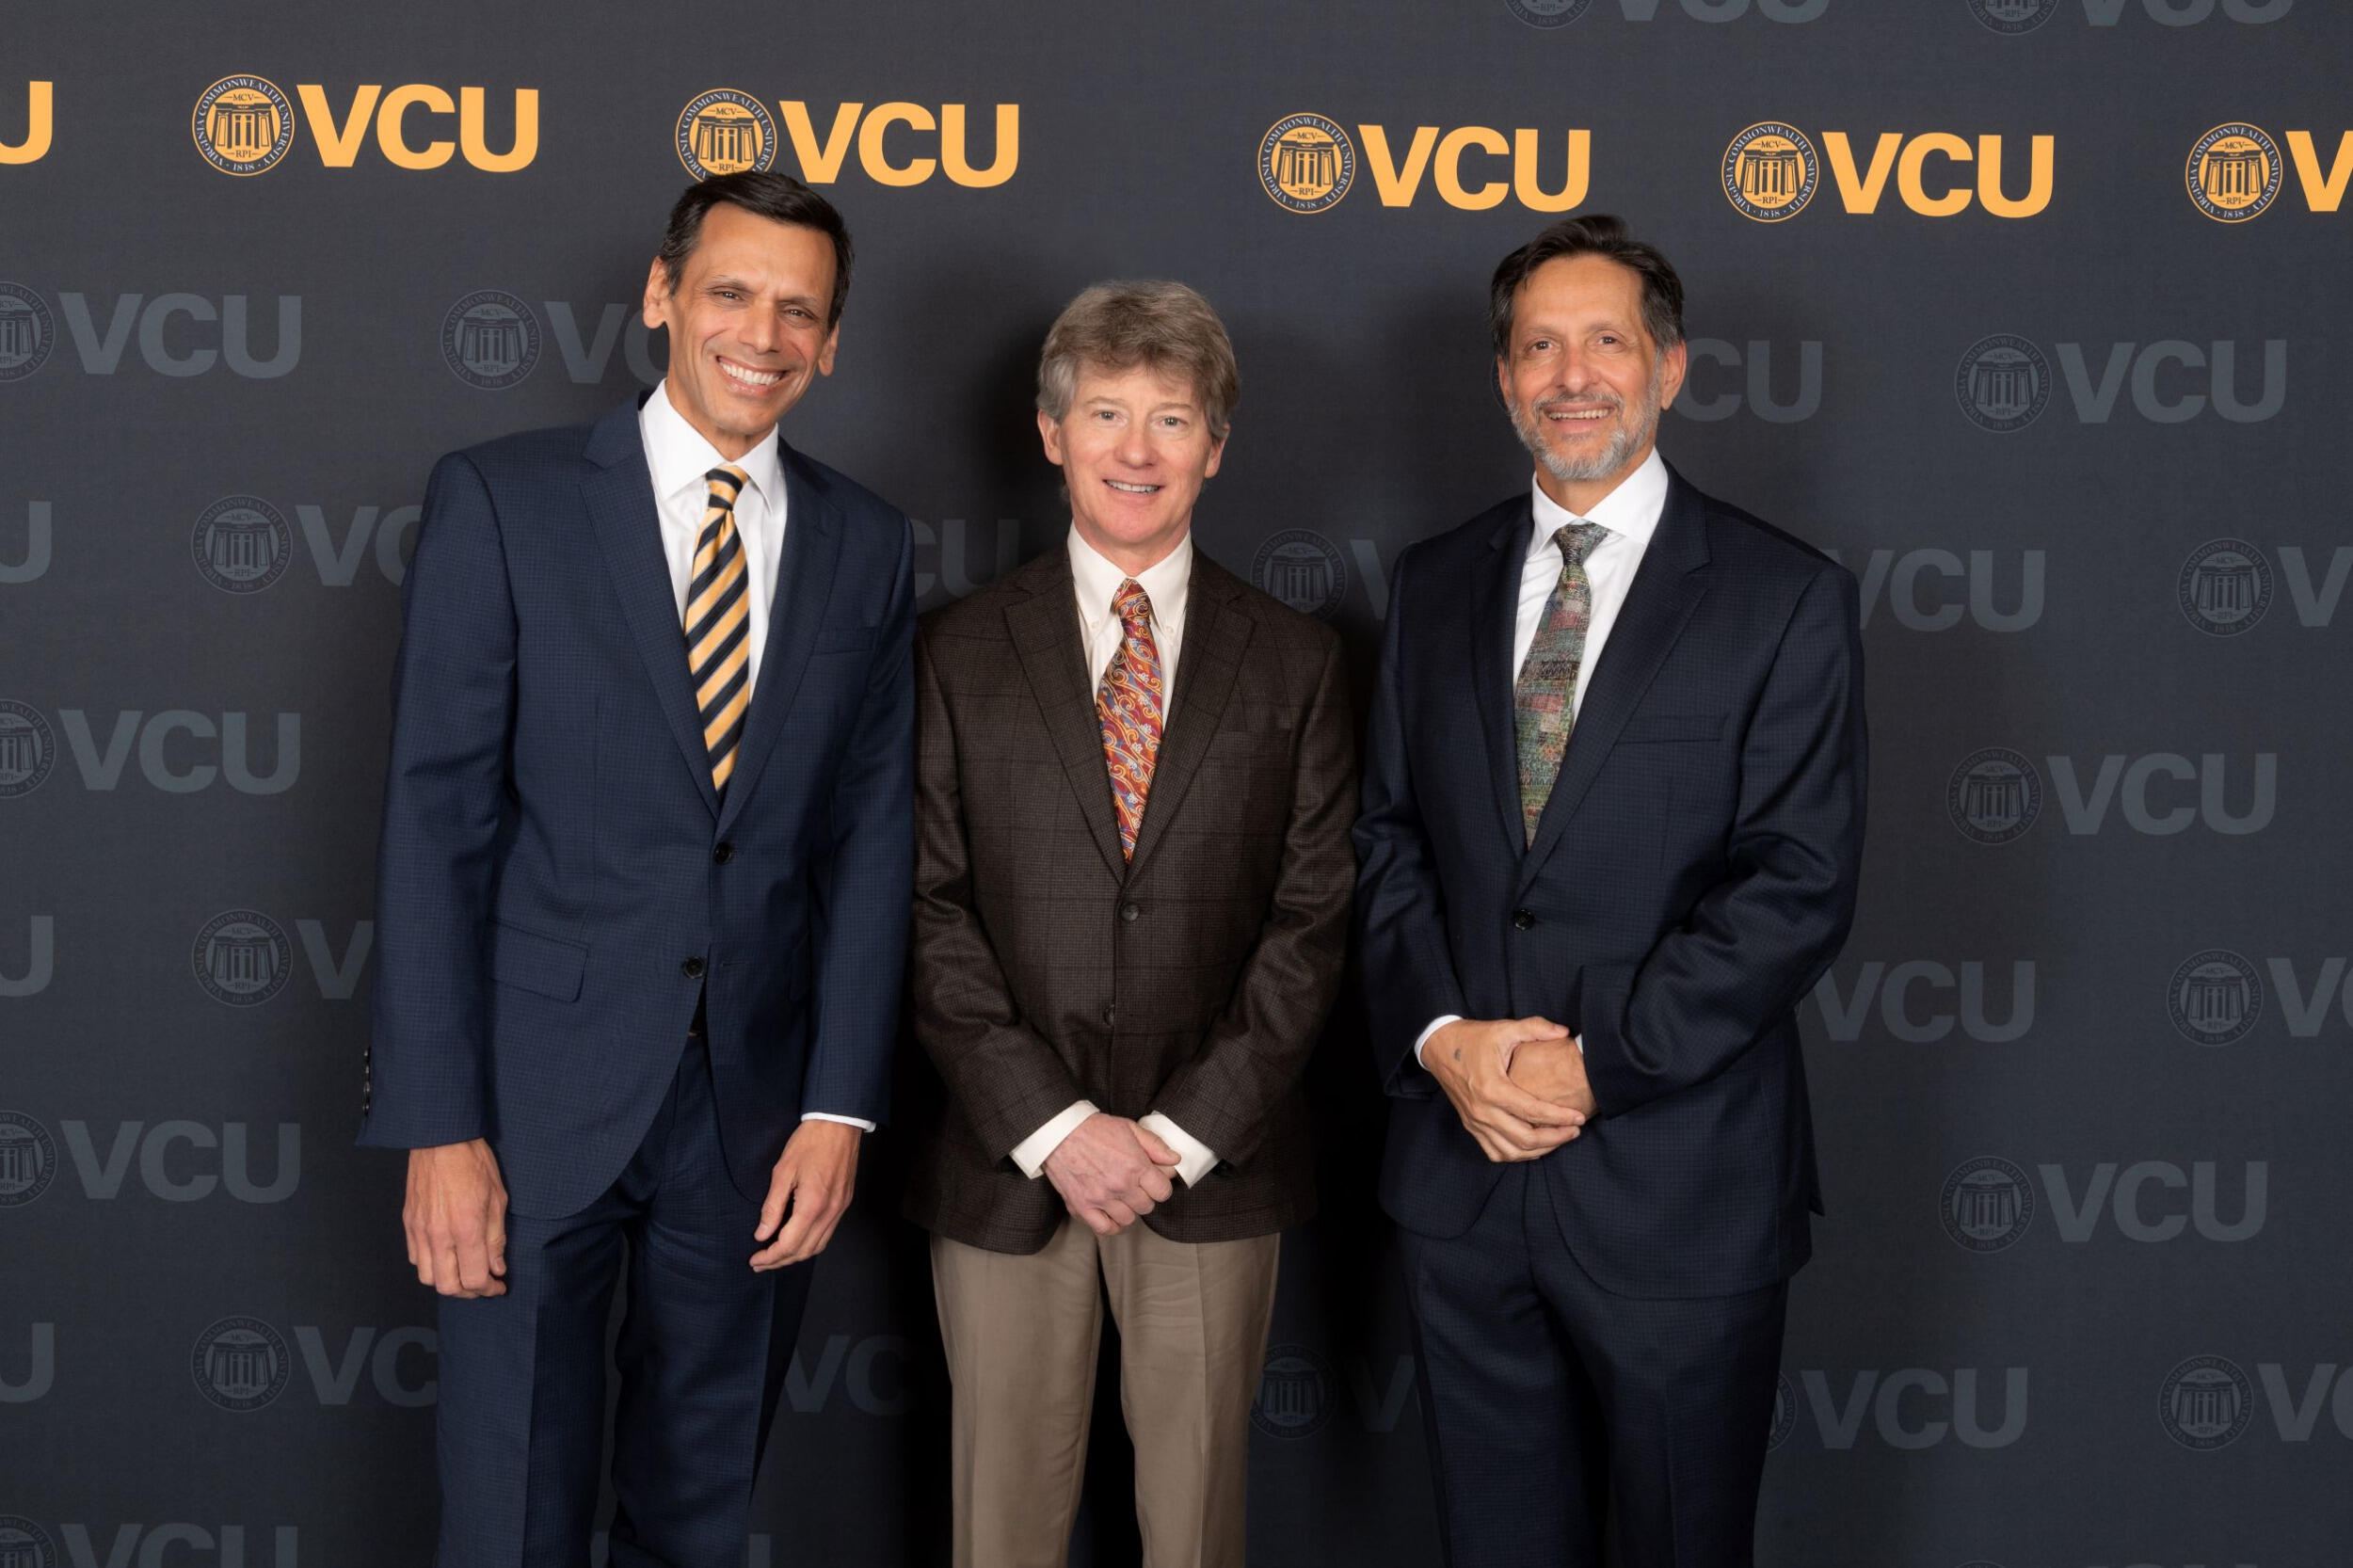 Michael Rao, R. Todd Stravitz and Arun Sanyal lined up in front of VCU logo.